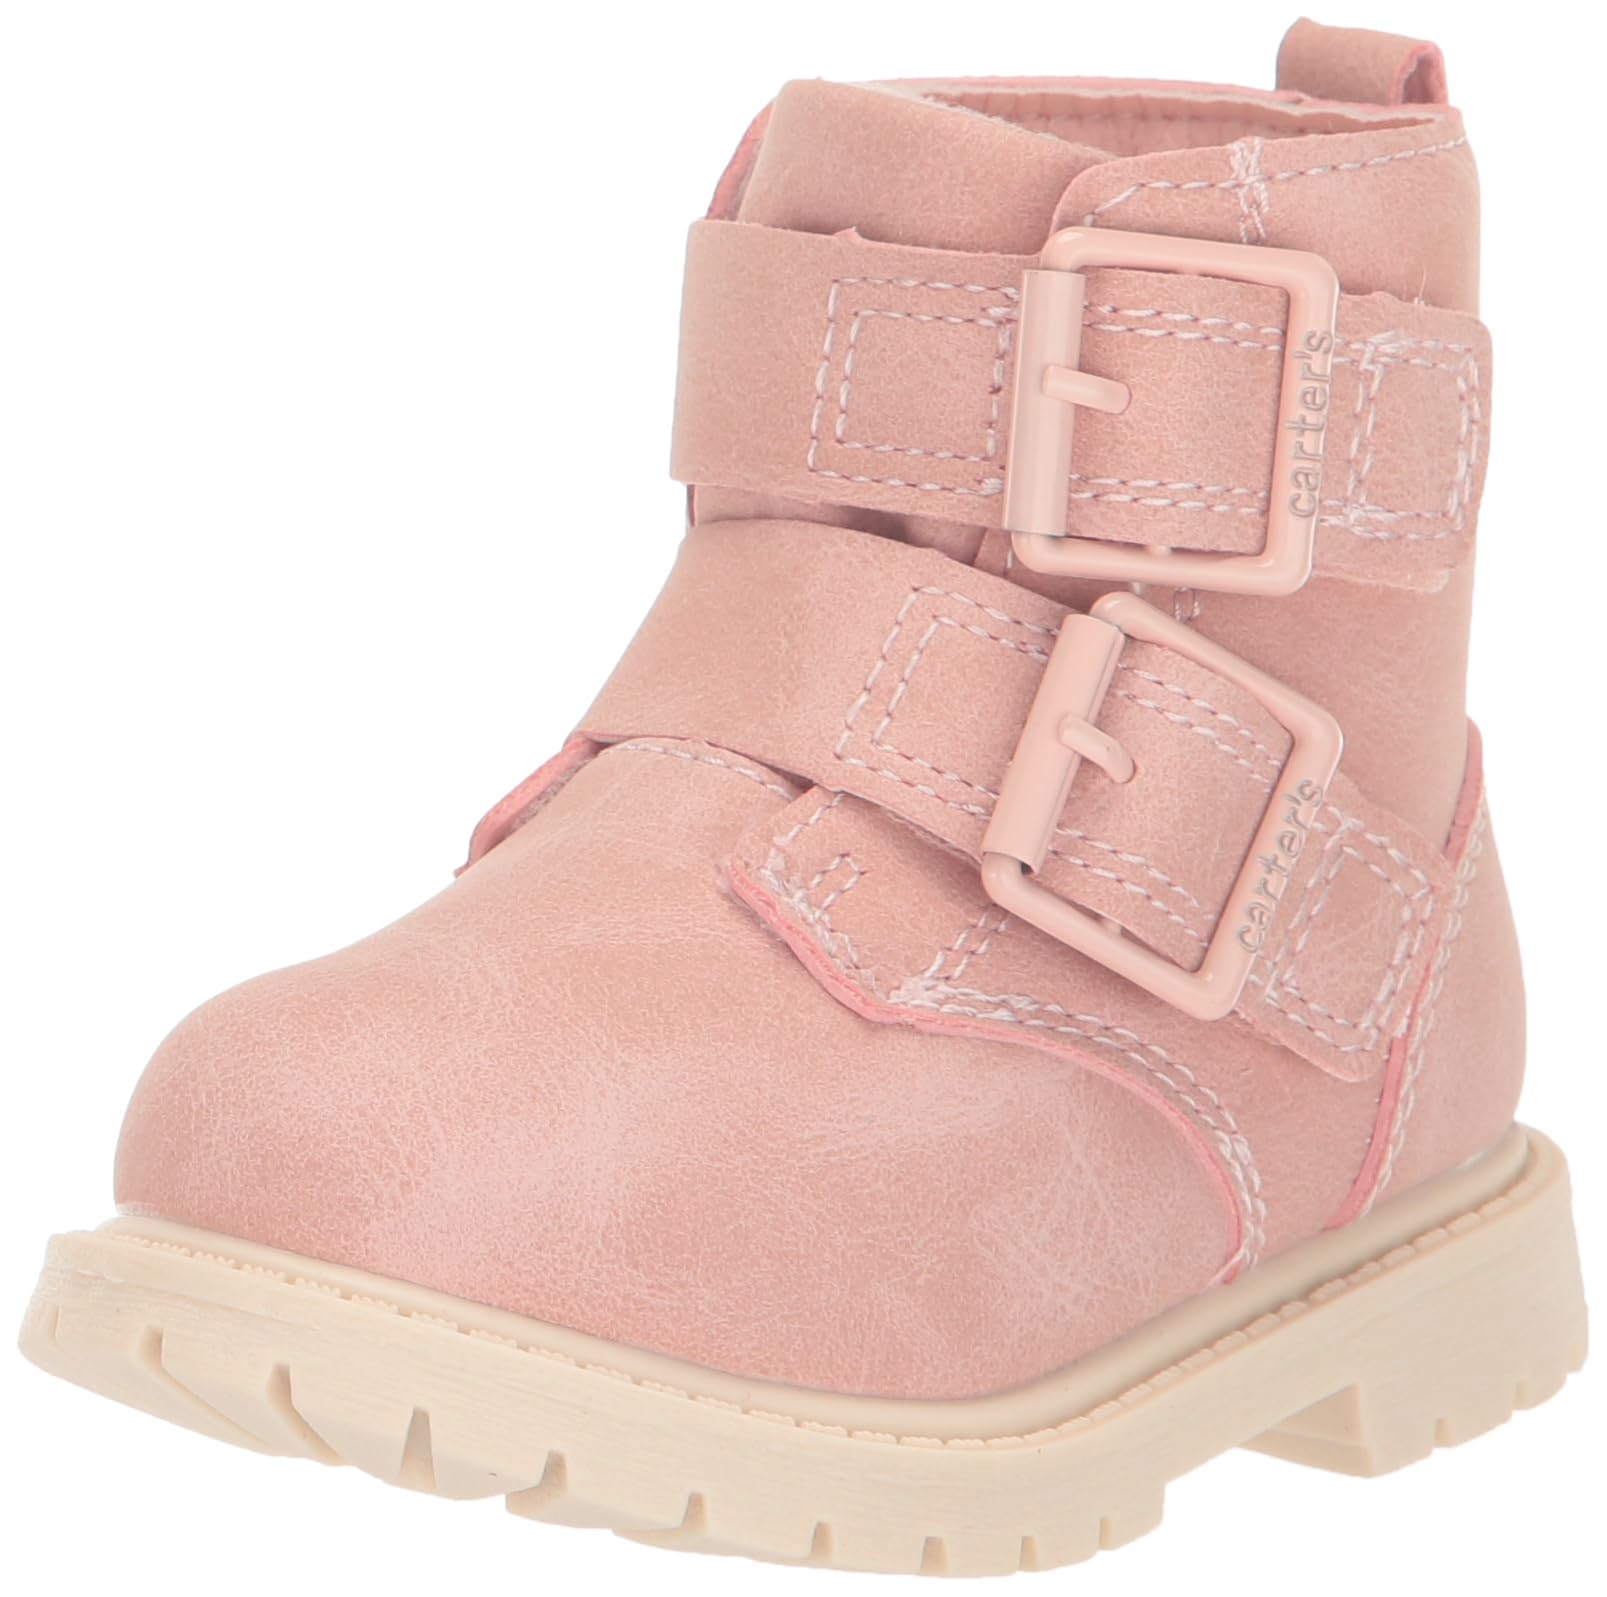 Carter's Unisex-Child Clary Boot